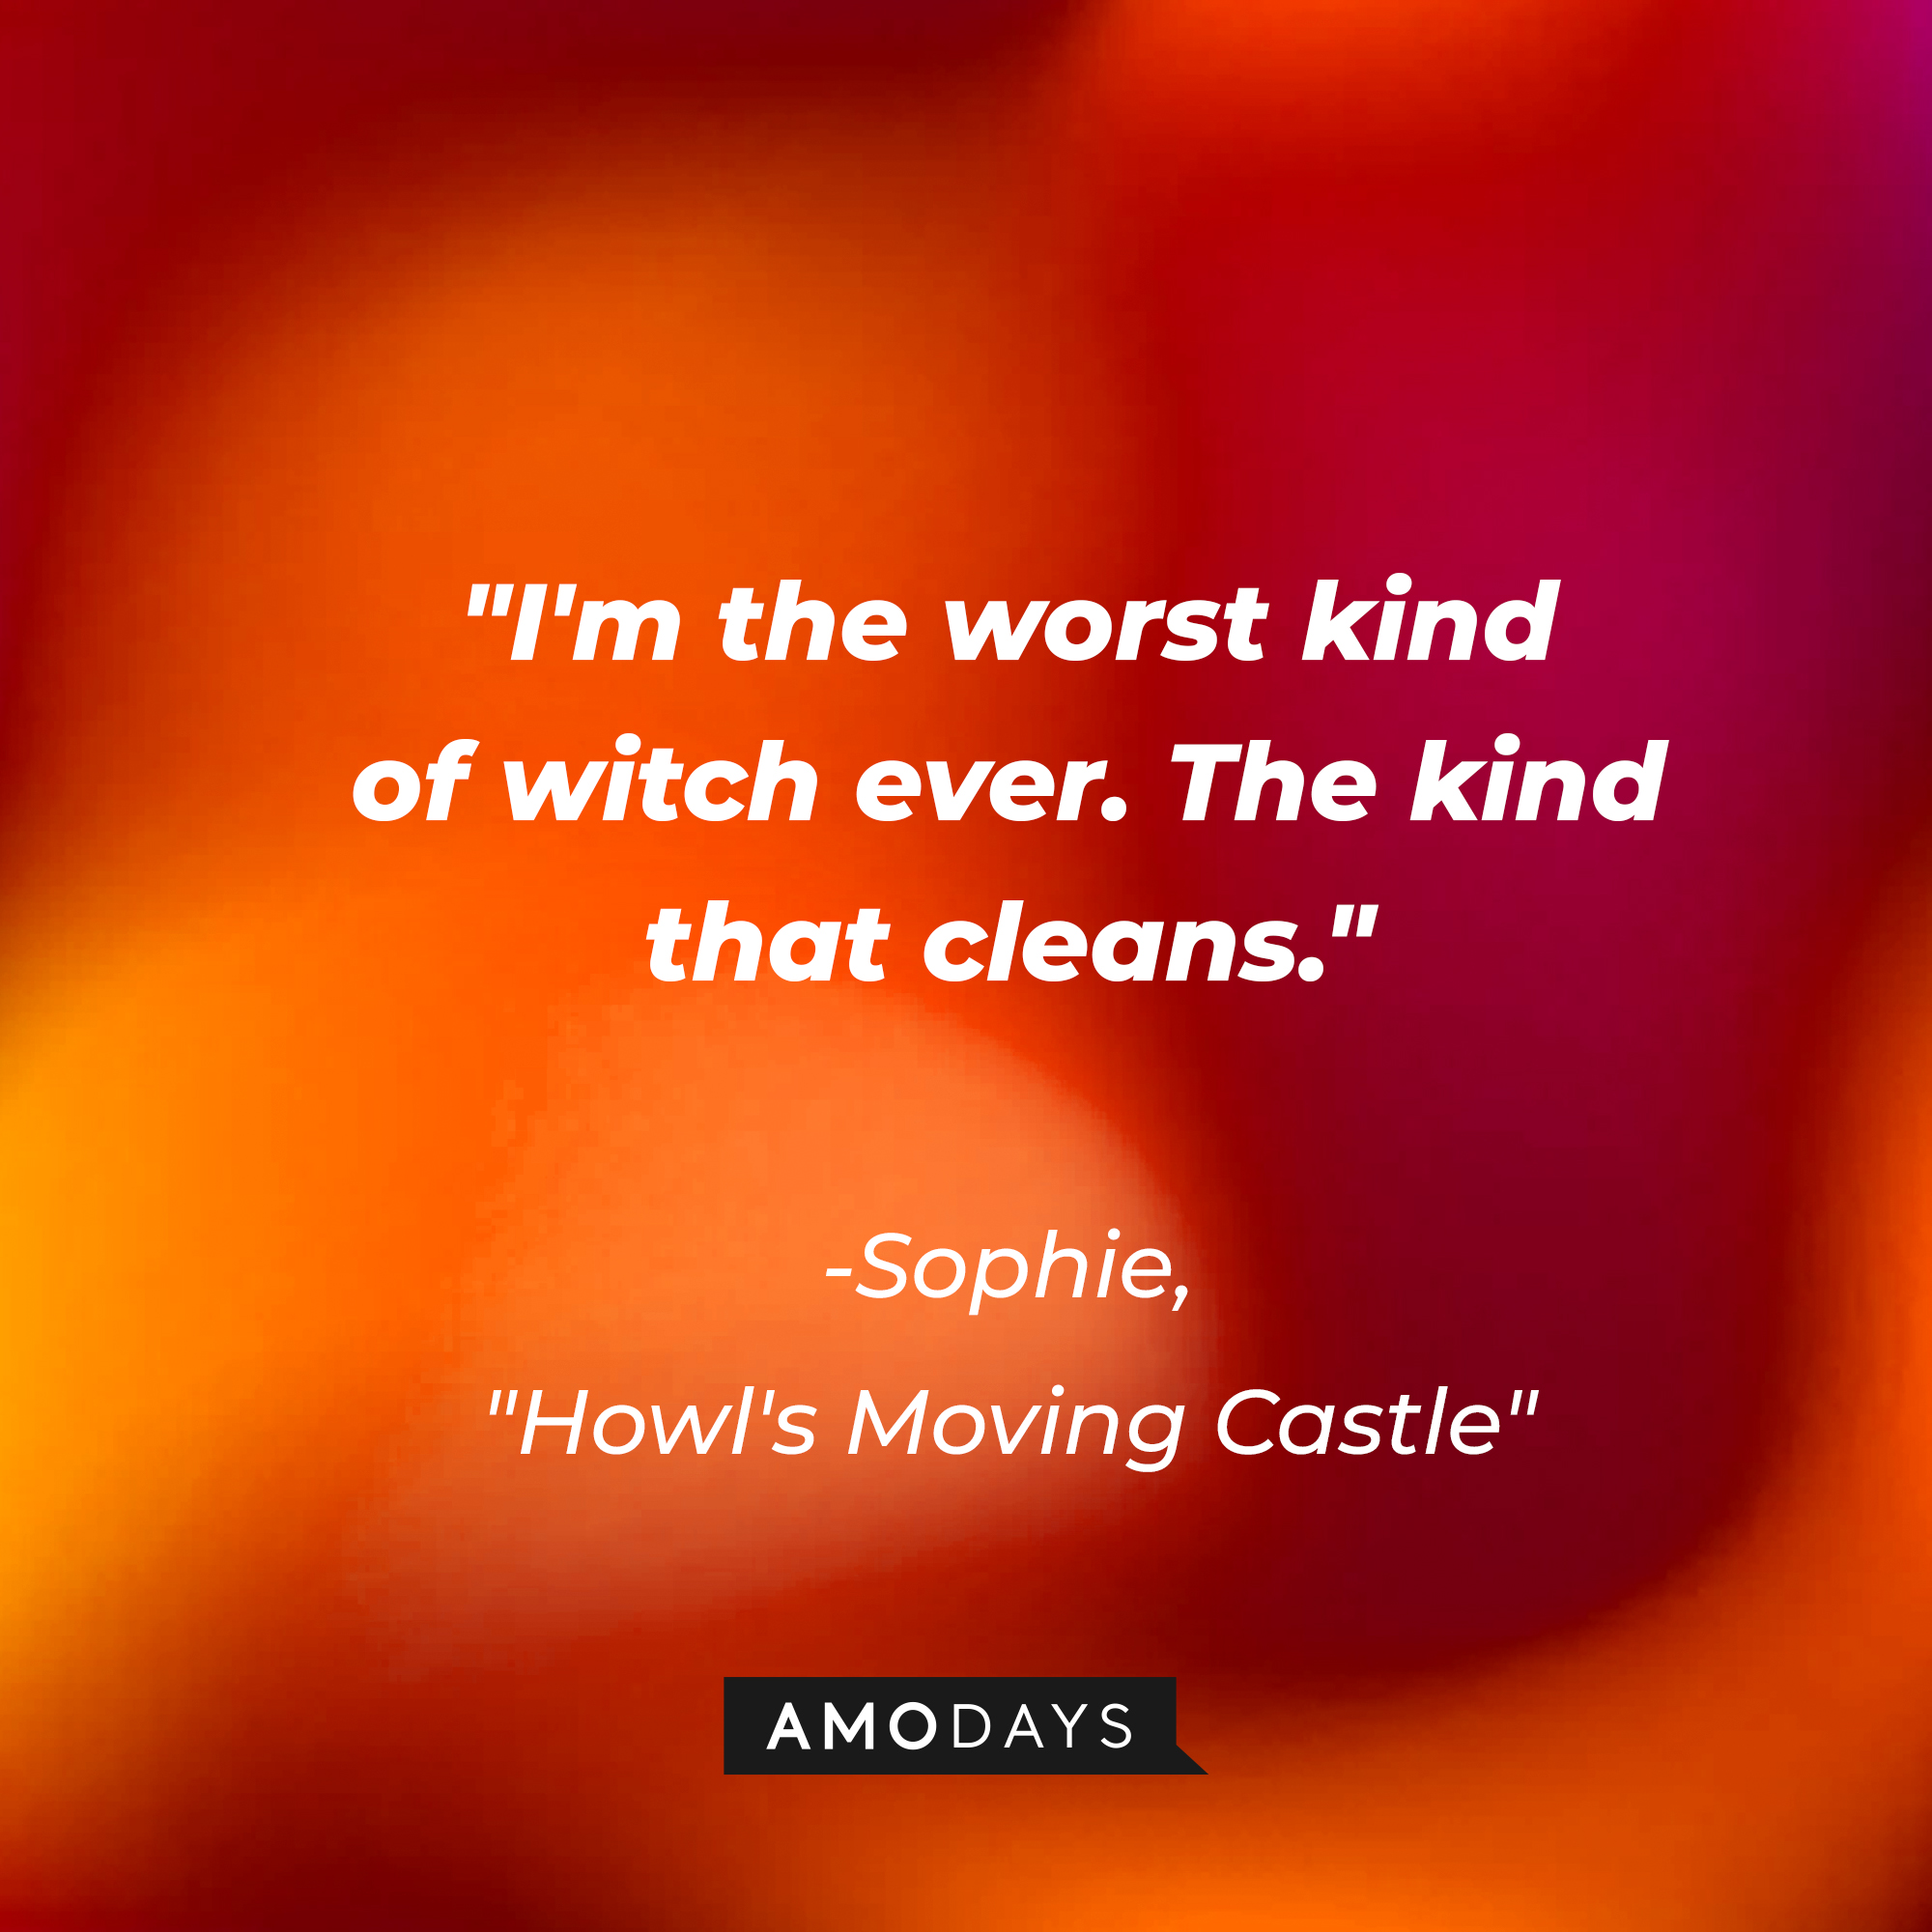 Sophie's quote in "Howl's Moving Castle:" "I'm the worst kind of witch ever. The kind that cleans." | Source: AmoDays